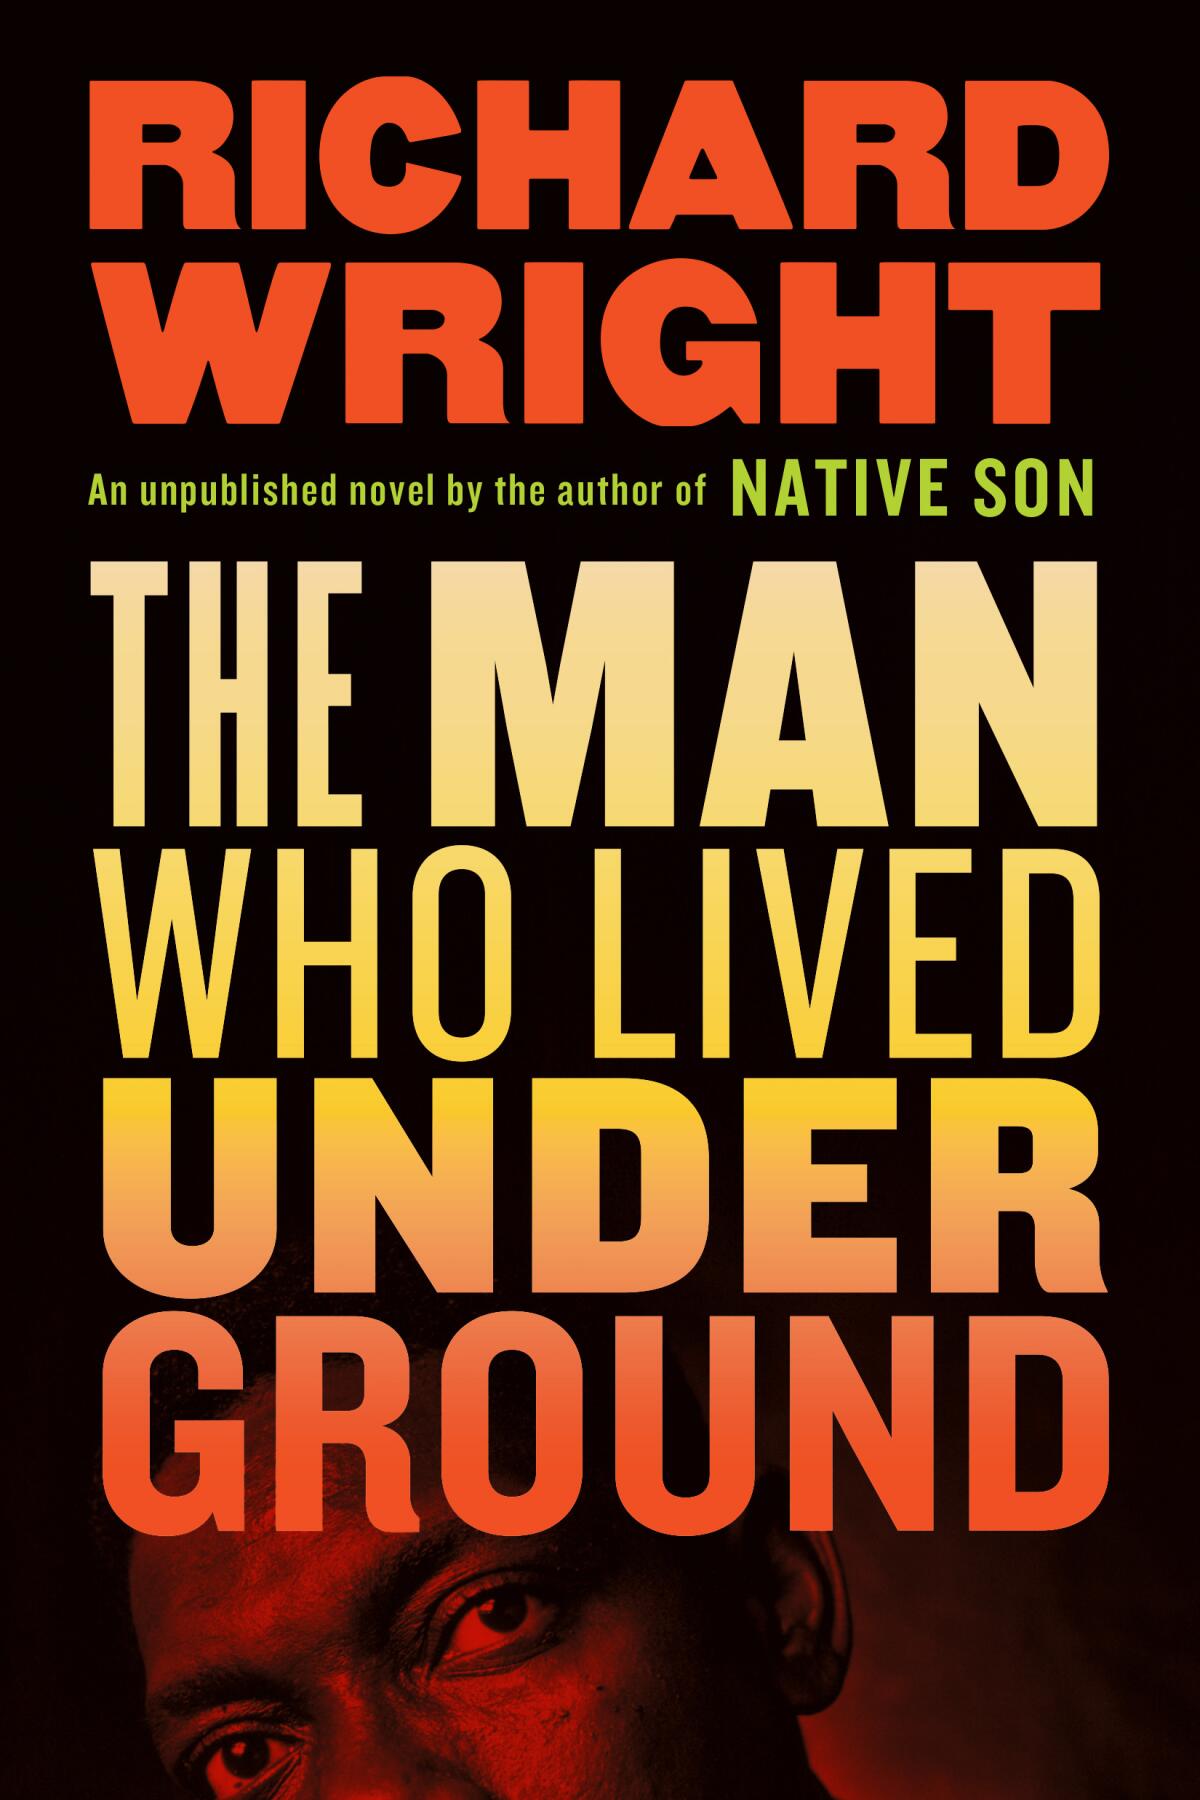 Black book cover with red and yellow text for "The Man Who Lived Underground" 